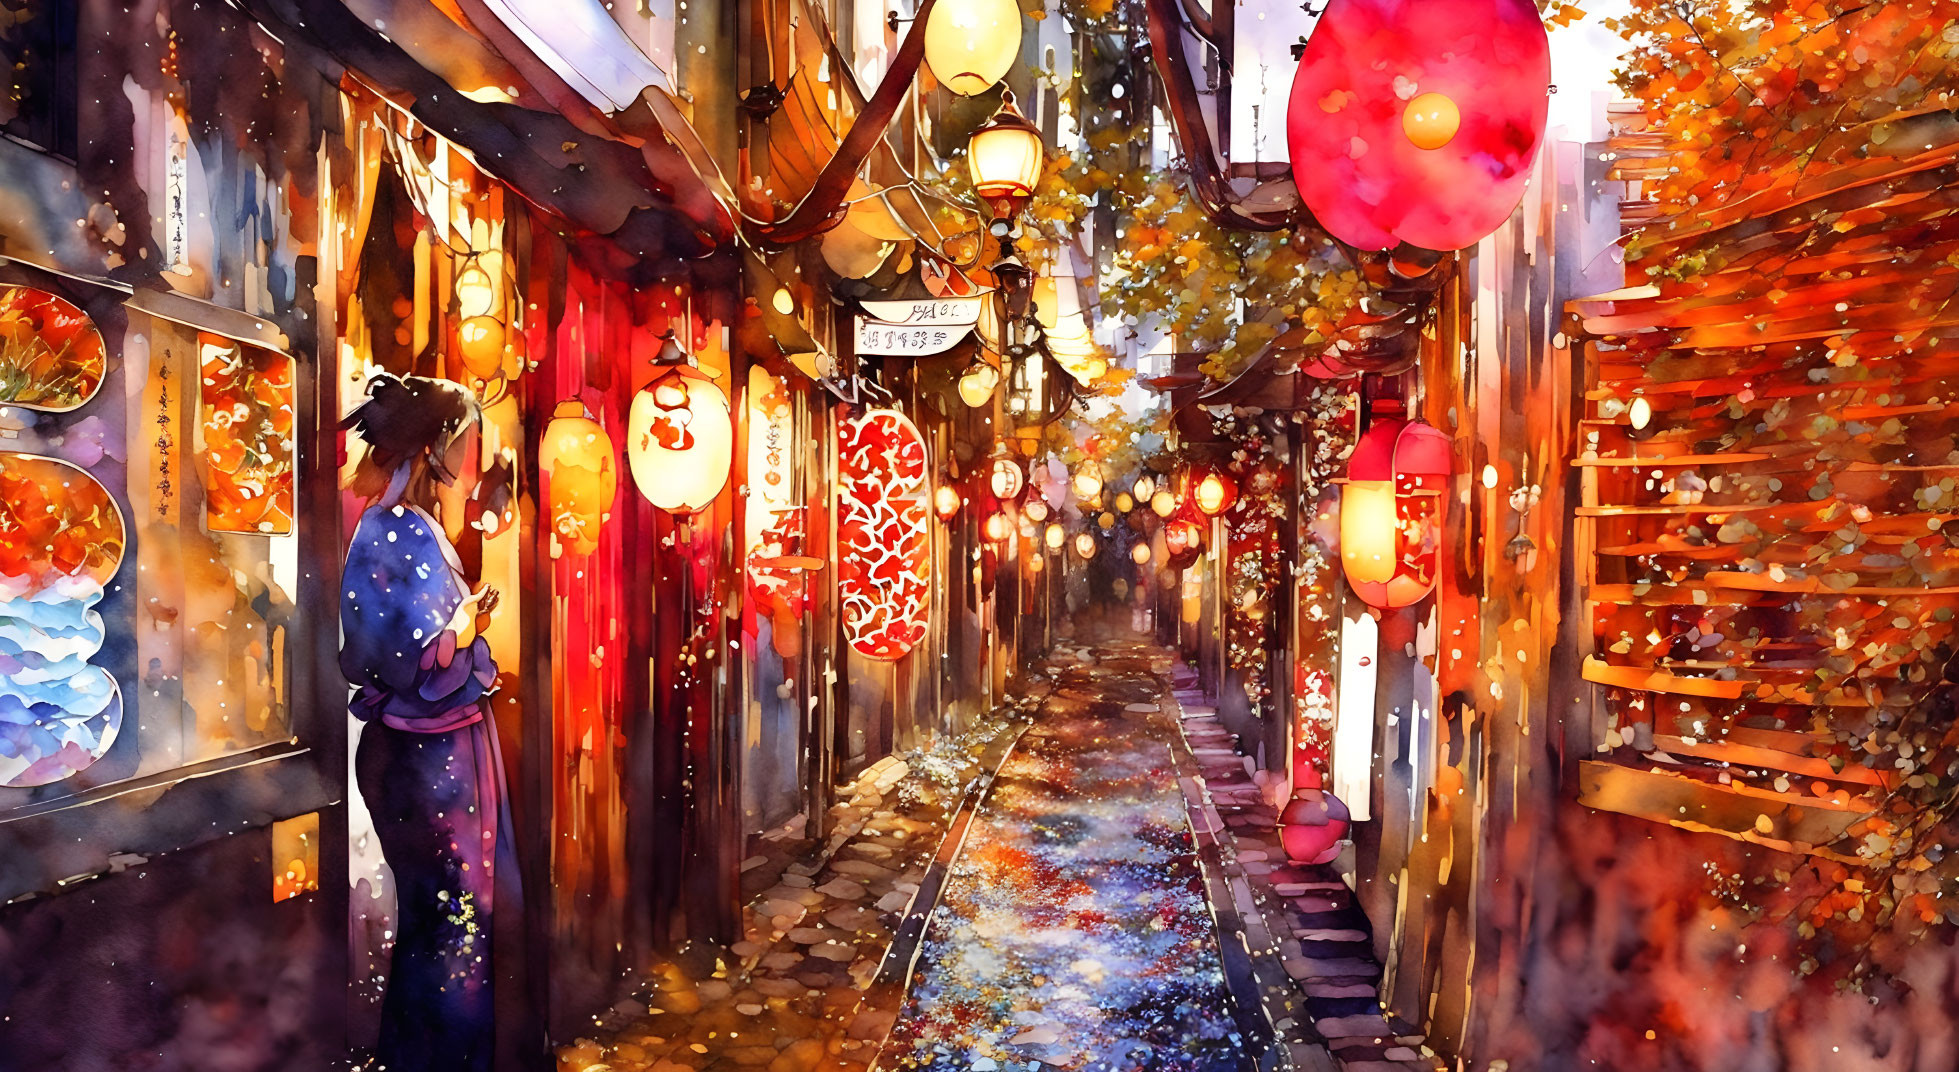 Japanese alley 